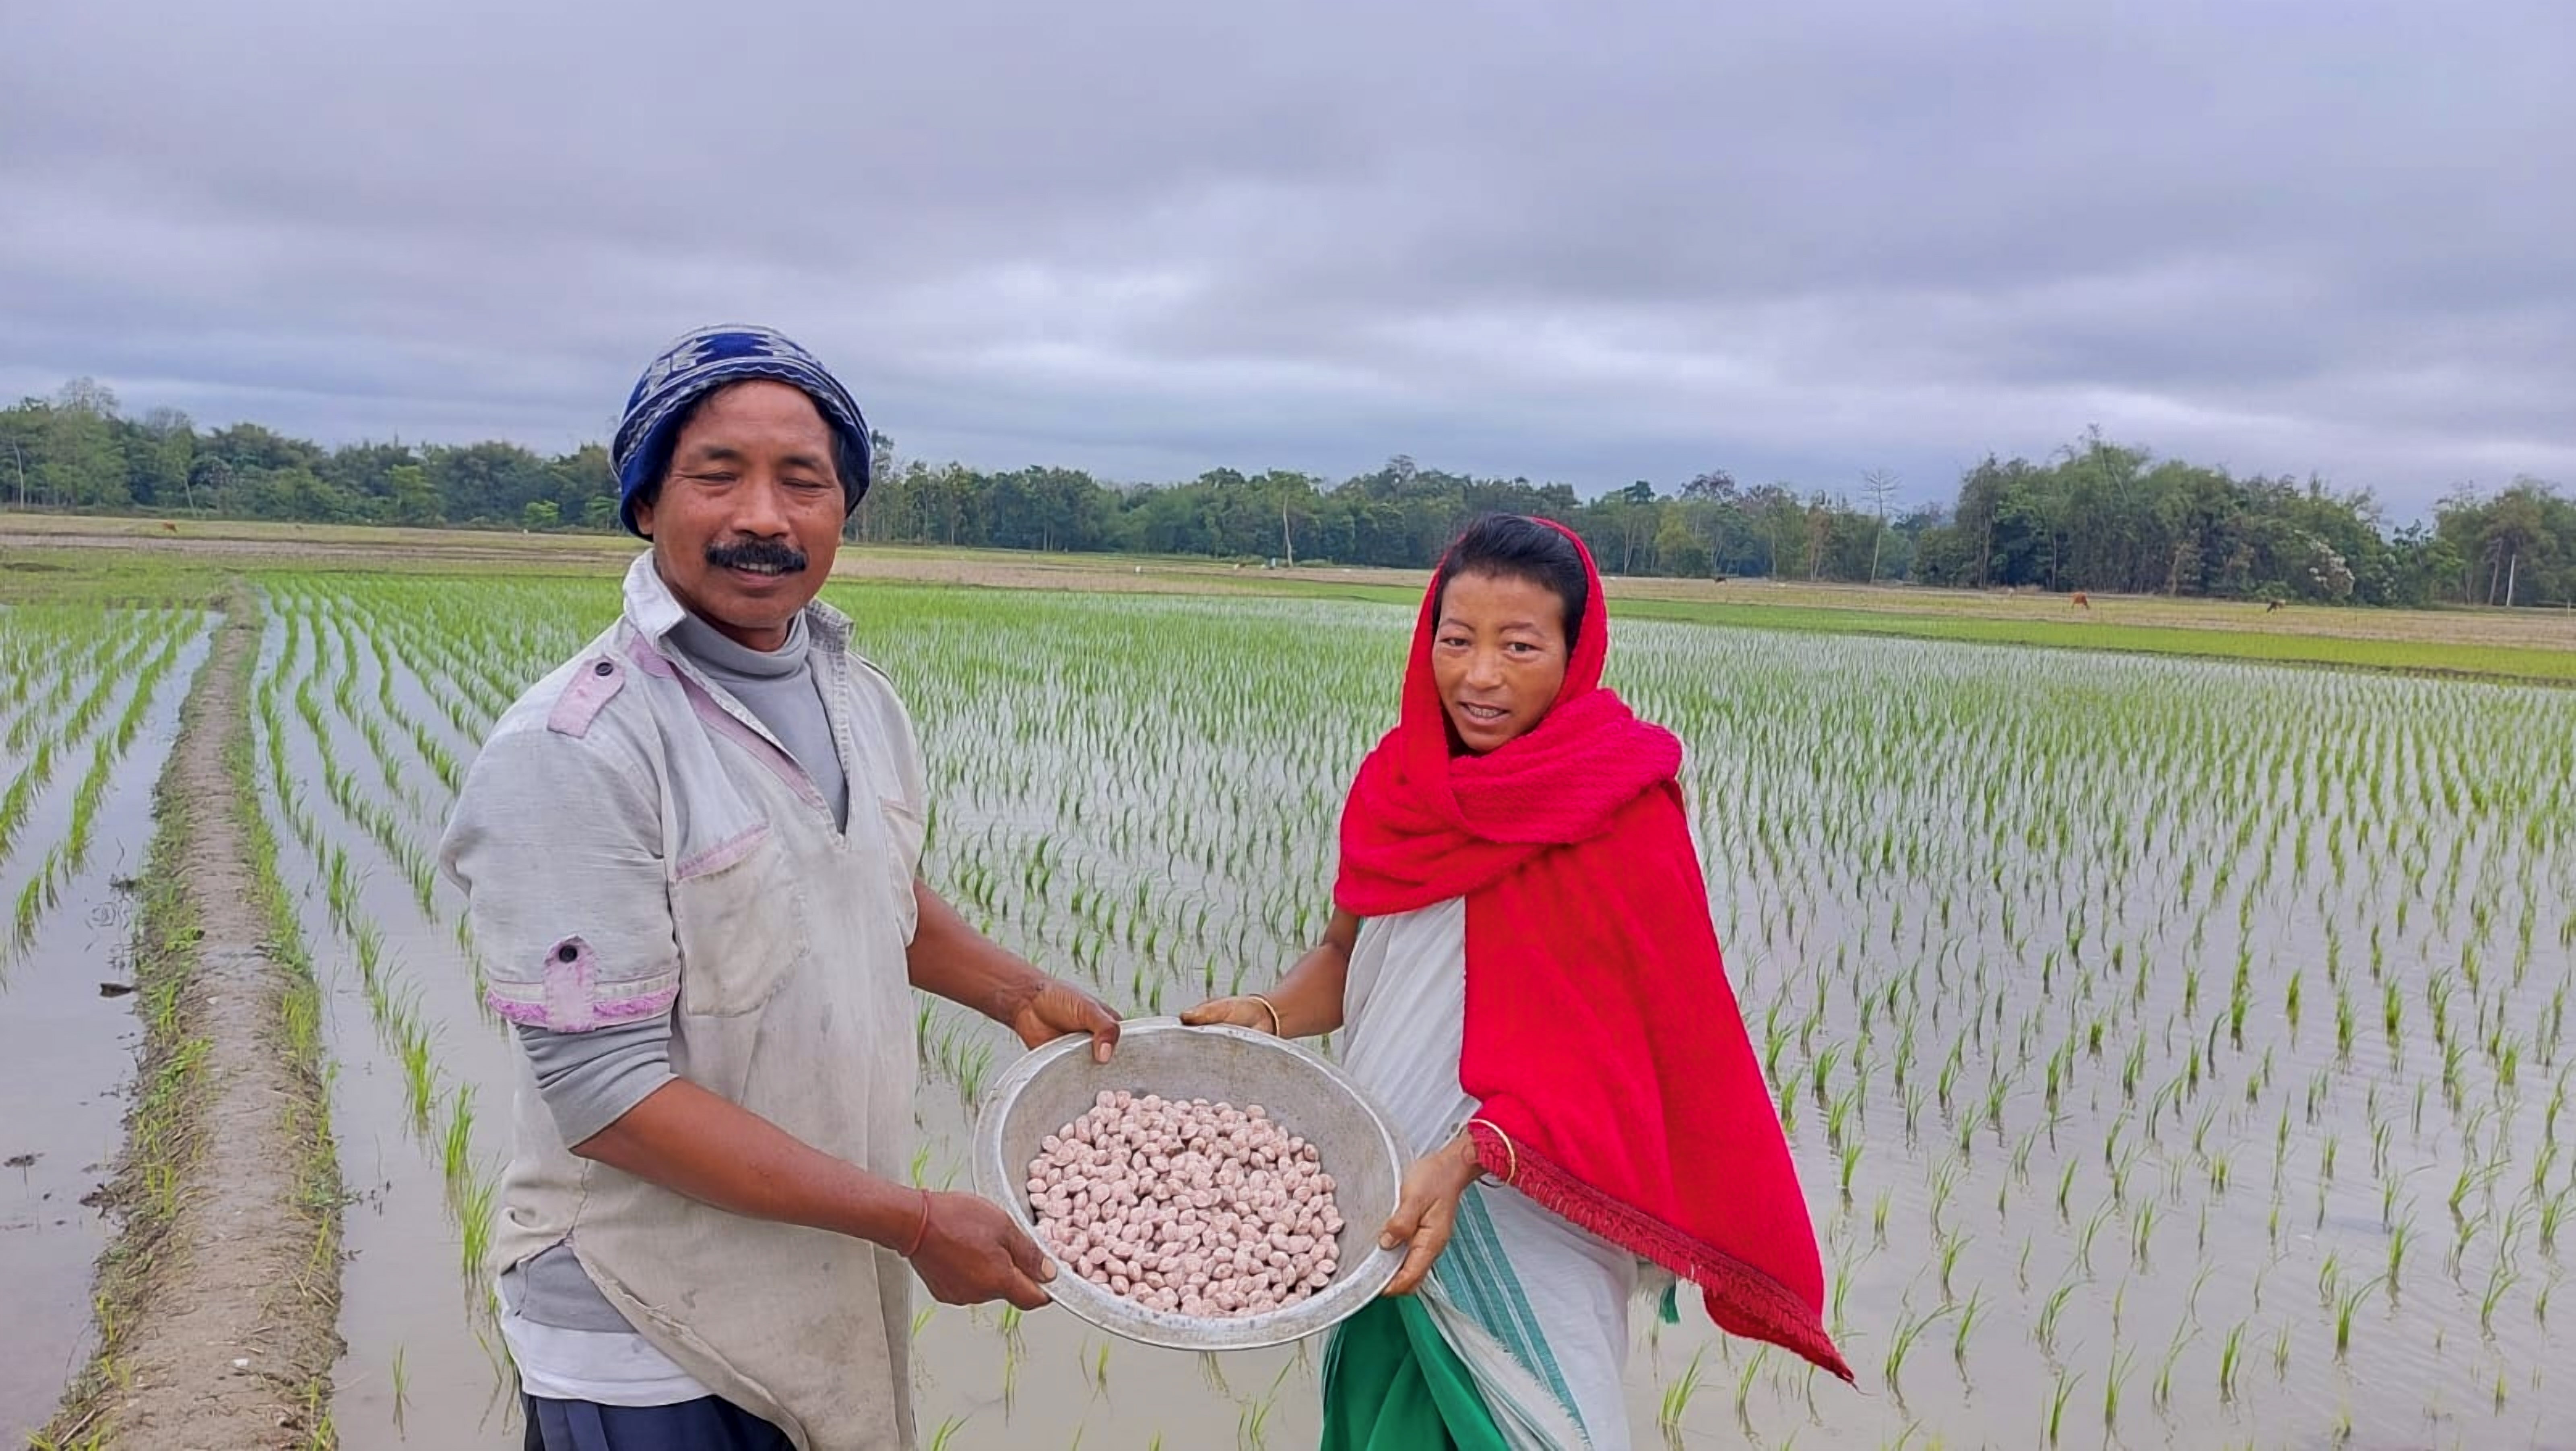 By using FDP briquettes, these farmers will increase rice production and decrease the amount of fertilizer used.